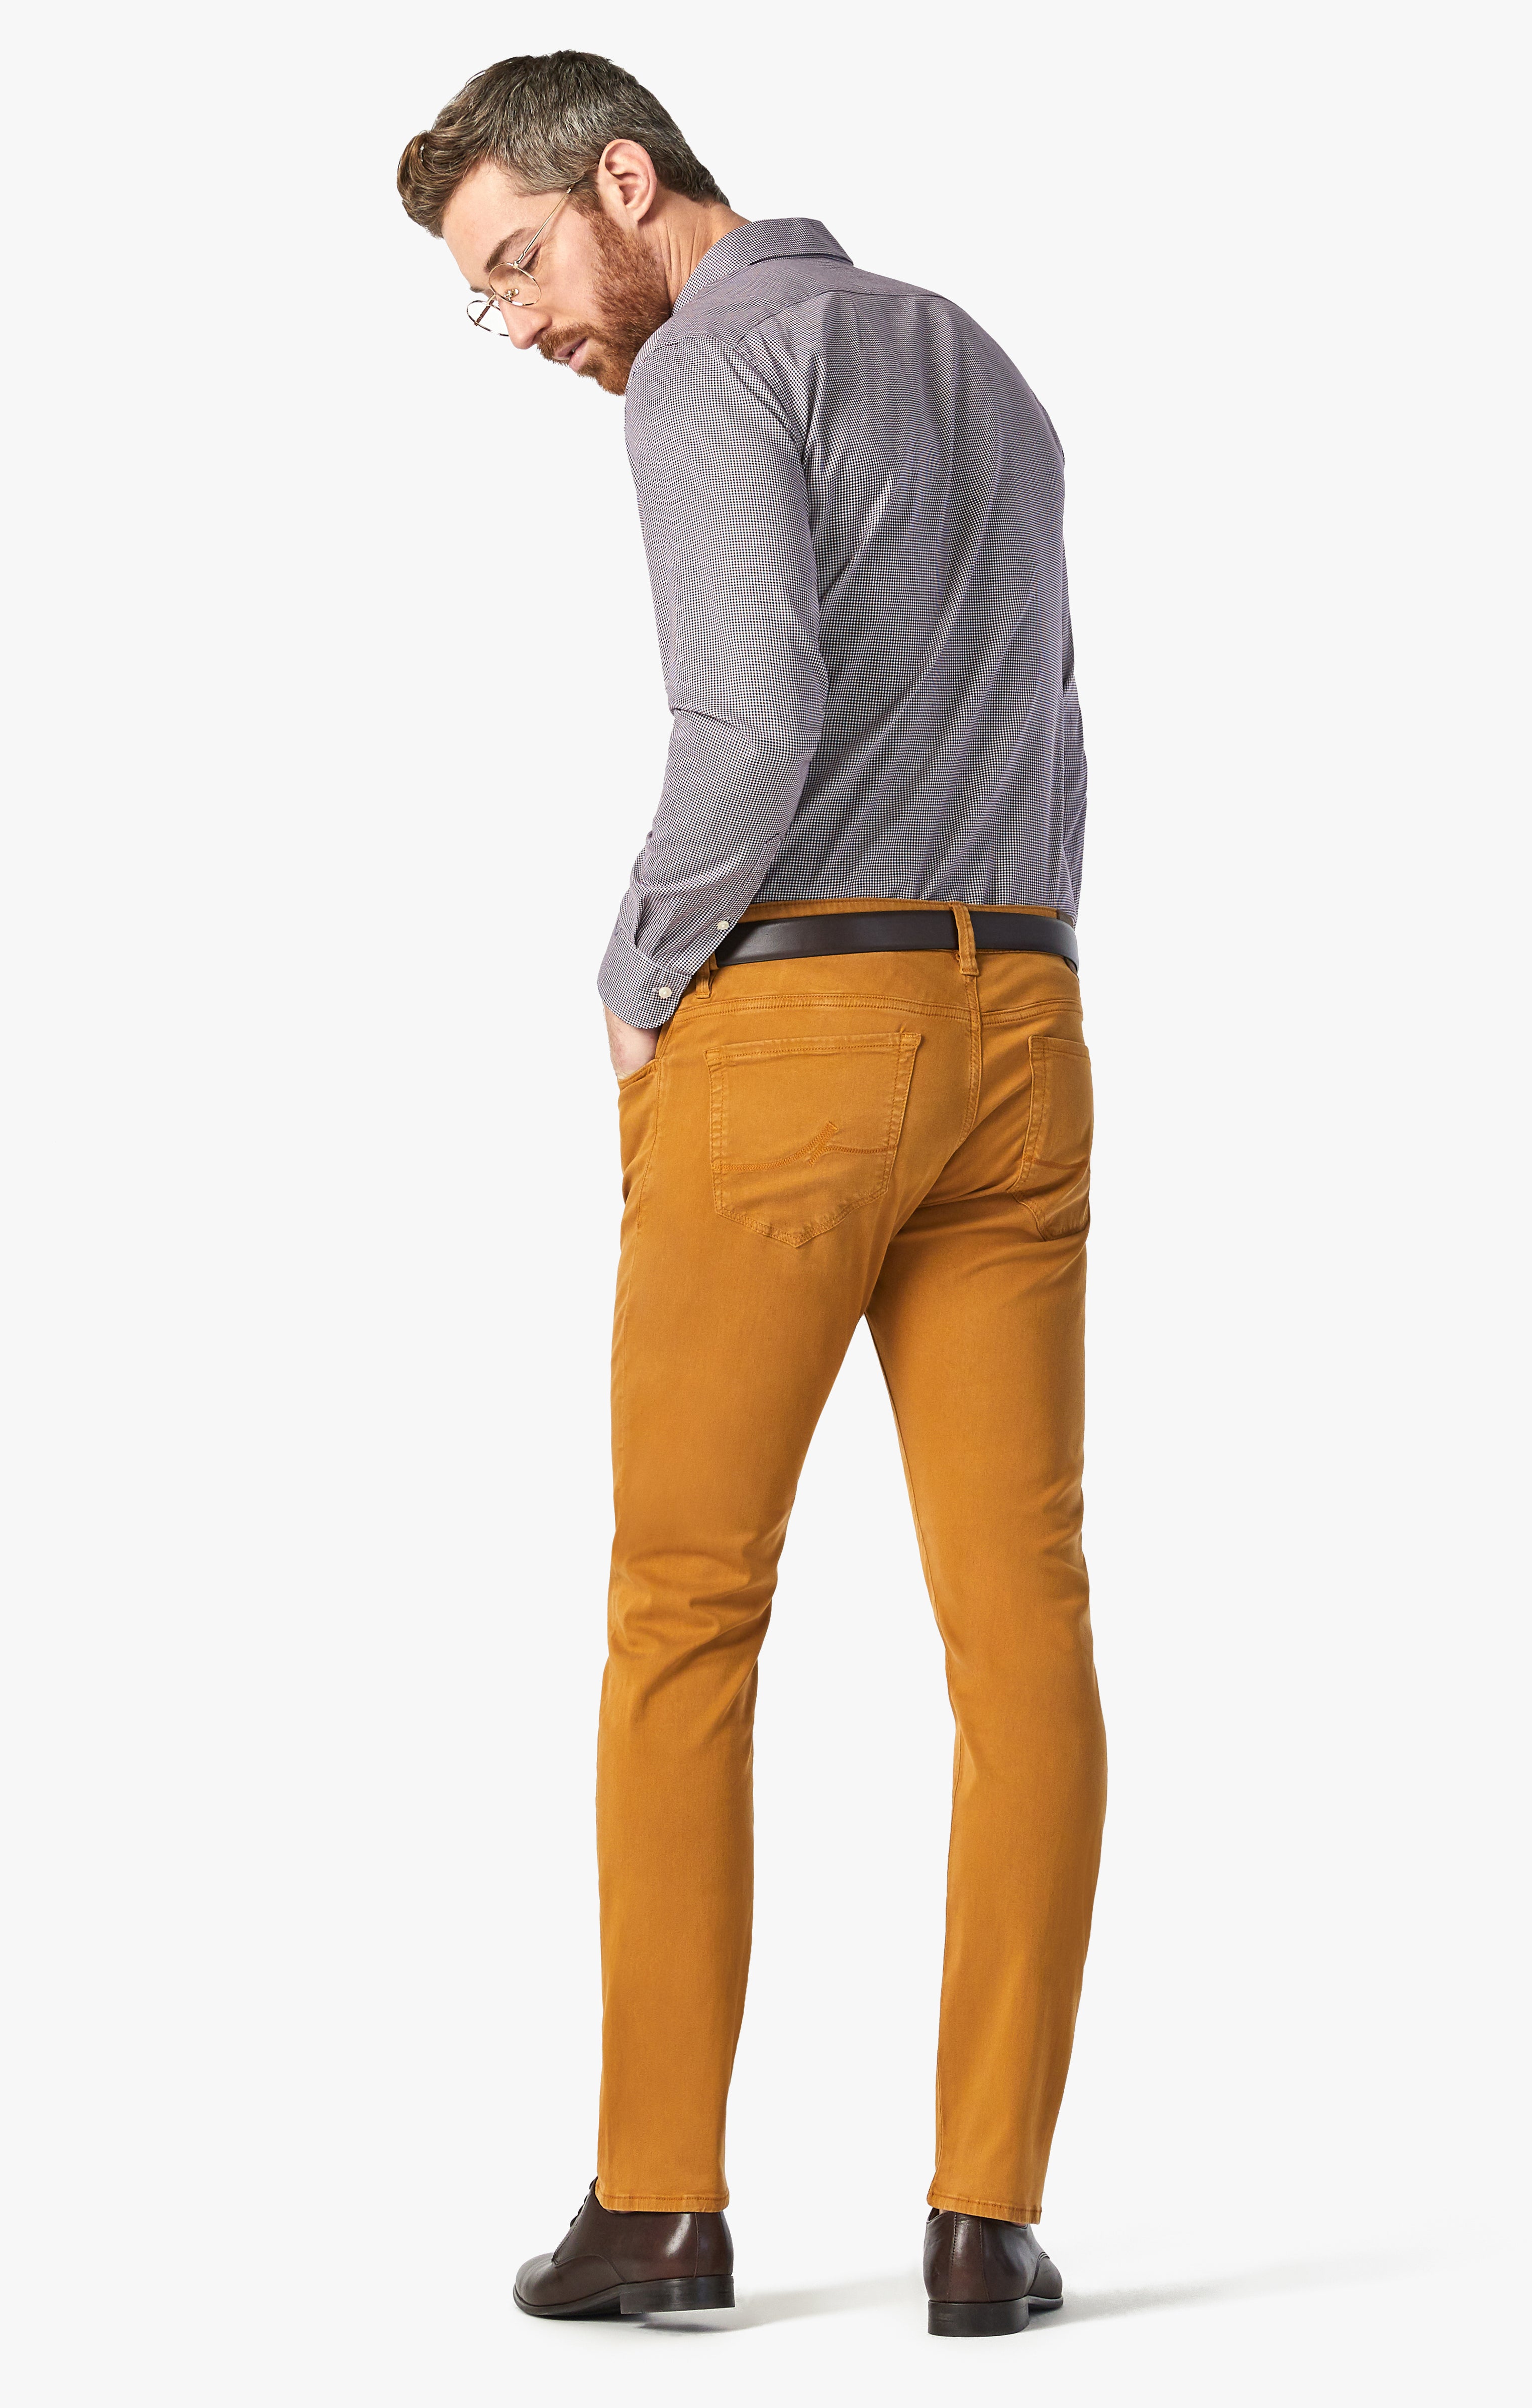 Courage Straight Leg Pants In Golden Brown Twill Image 2